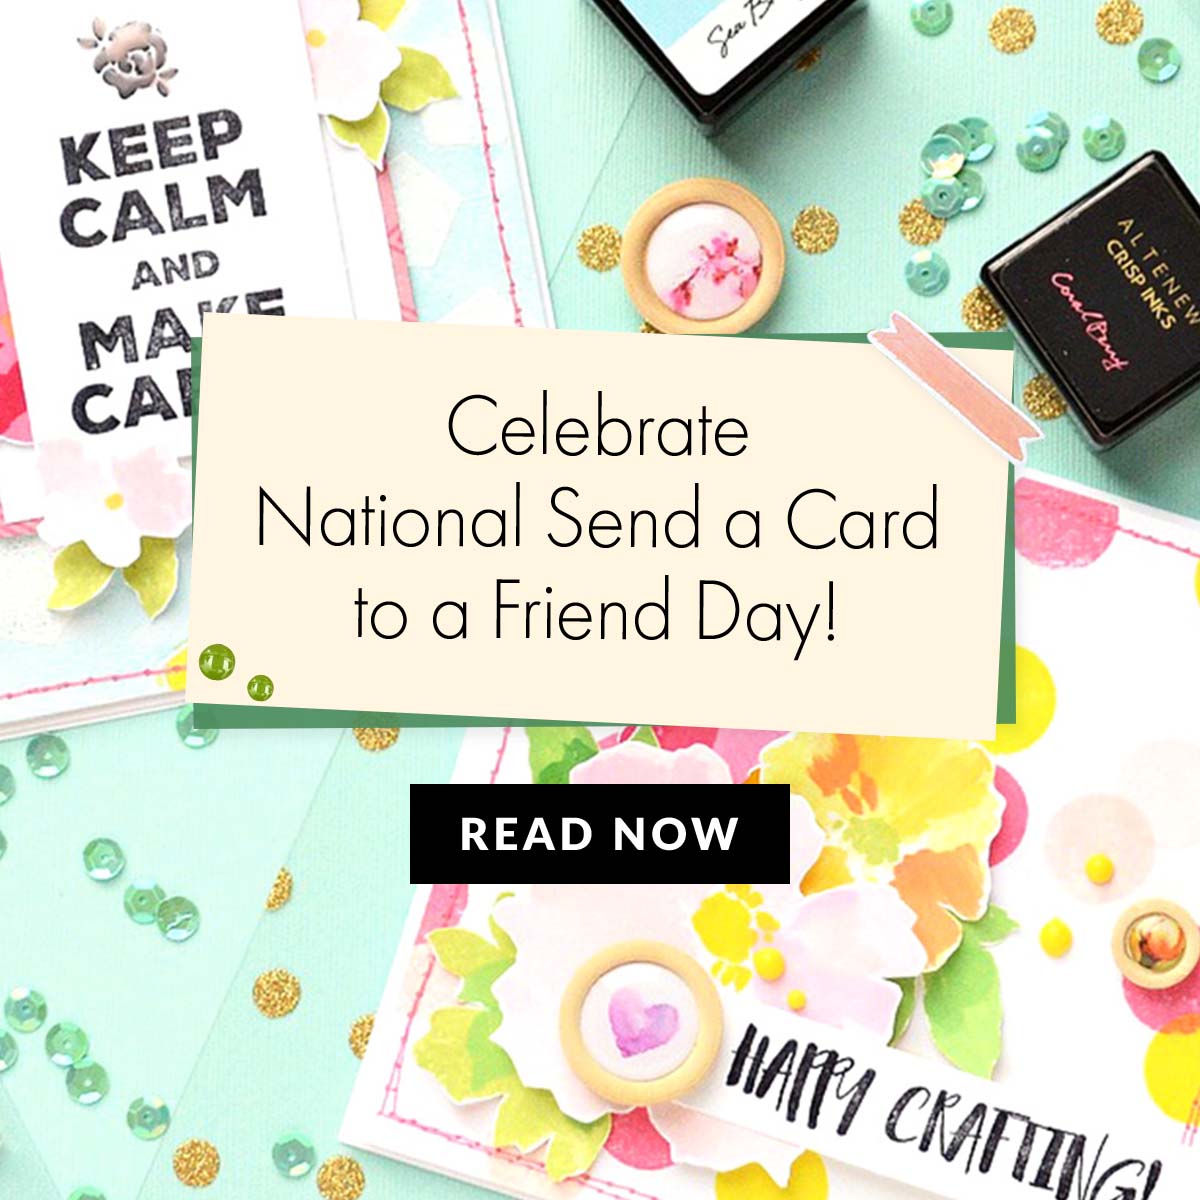 Celebrate National Send a Card to a Friend Day with 13 Easy Card Ideas